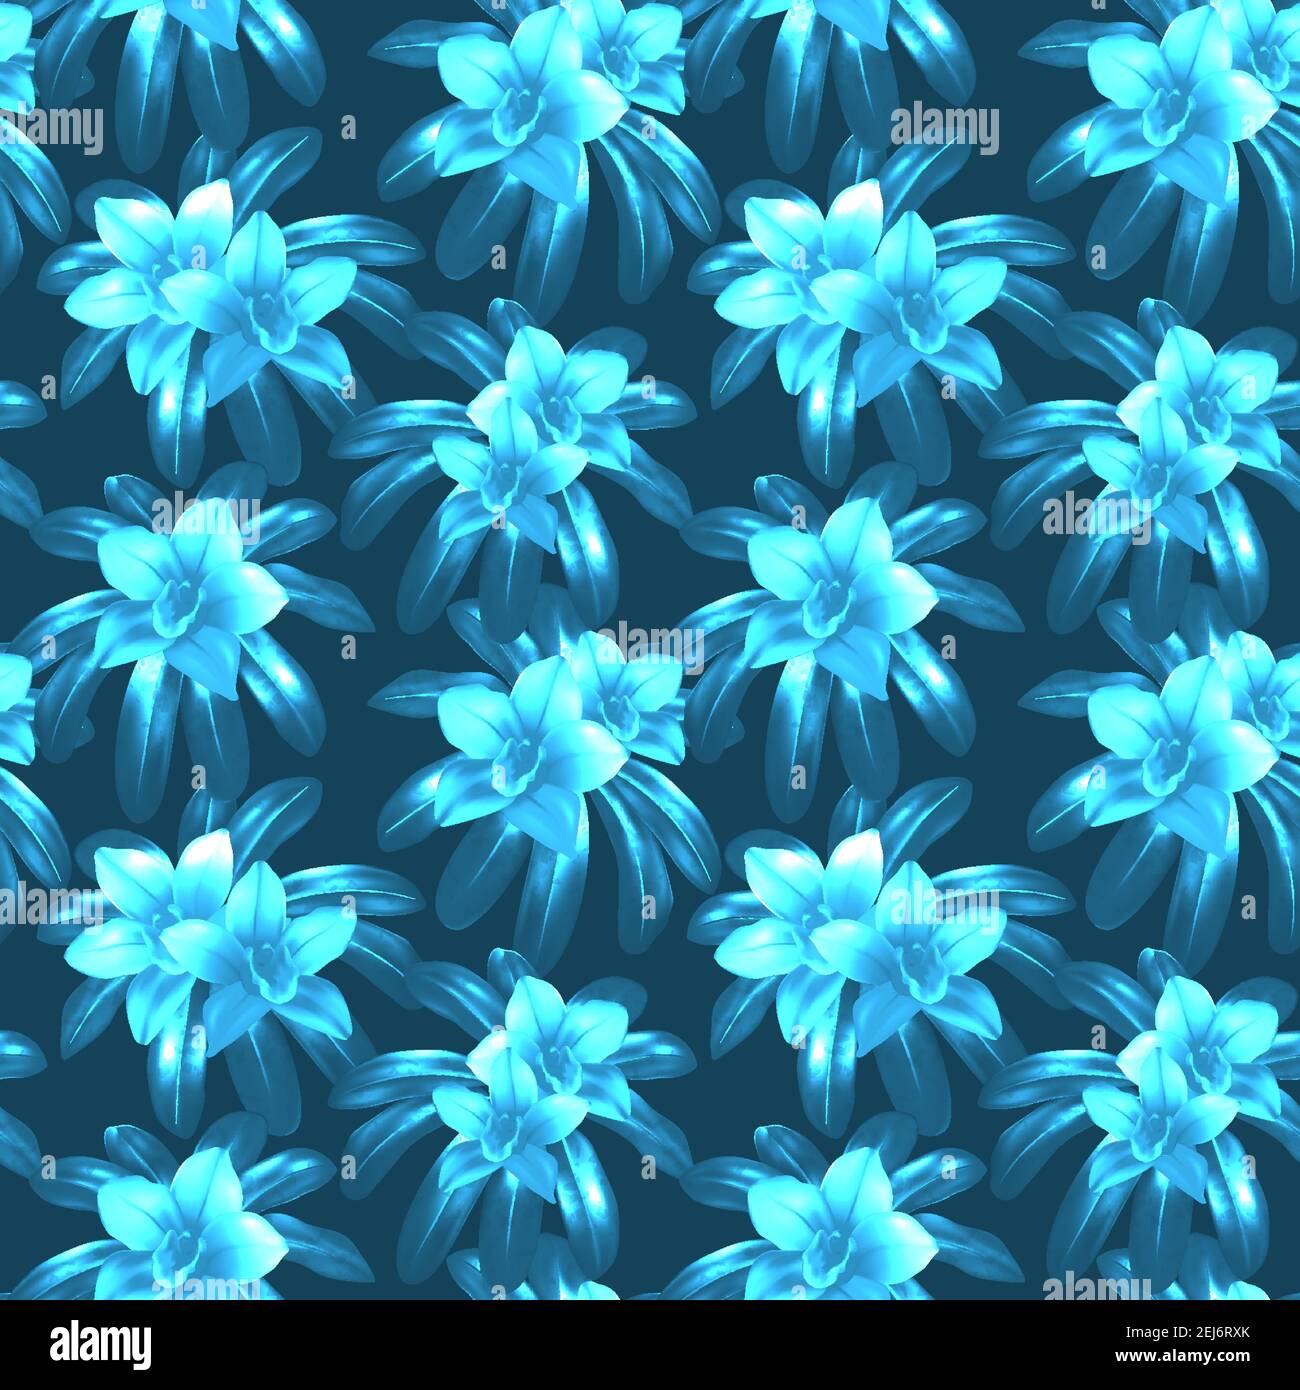 Blue and white tropical flowers silhouettes vector seamless pattern Stock Vector